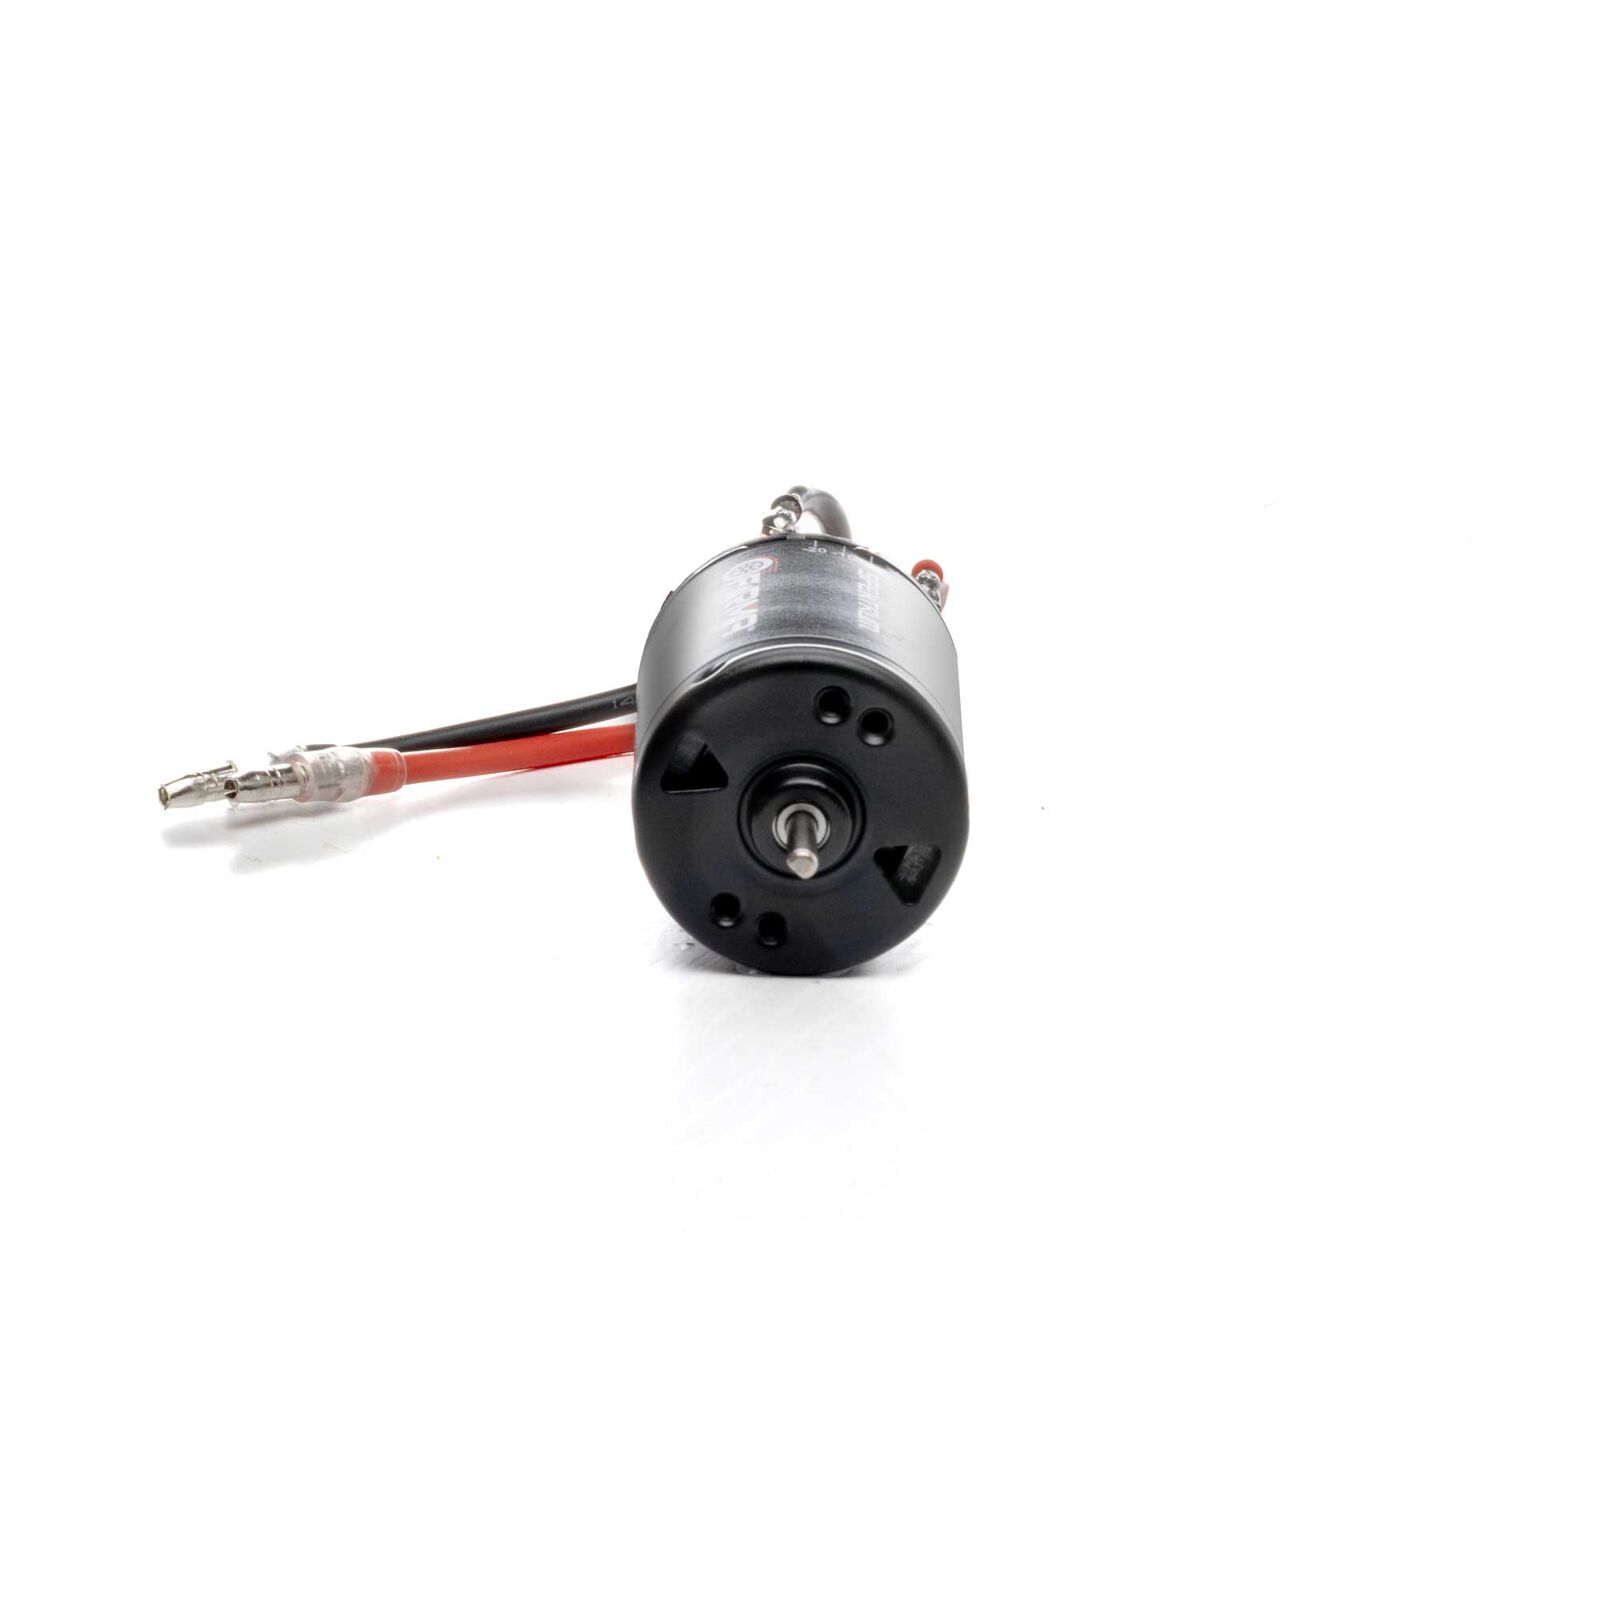 Firma 12T Rebuildable 550 3-Pole Brushed Motor